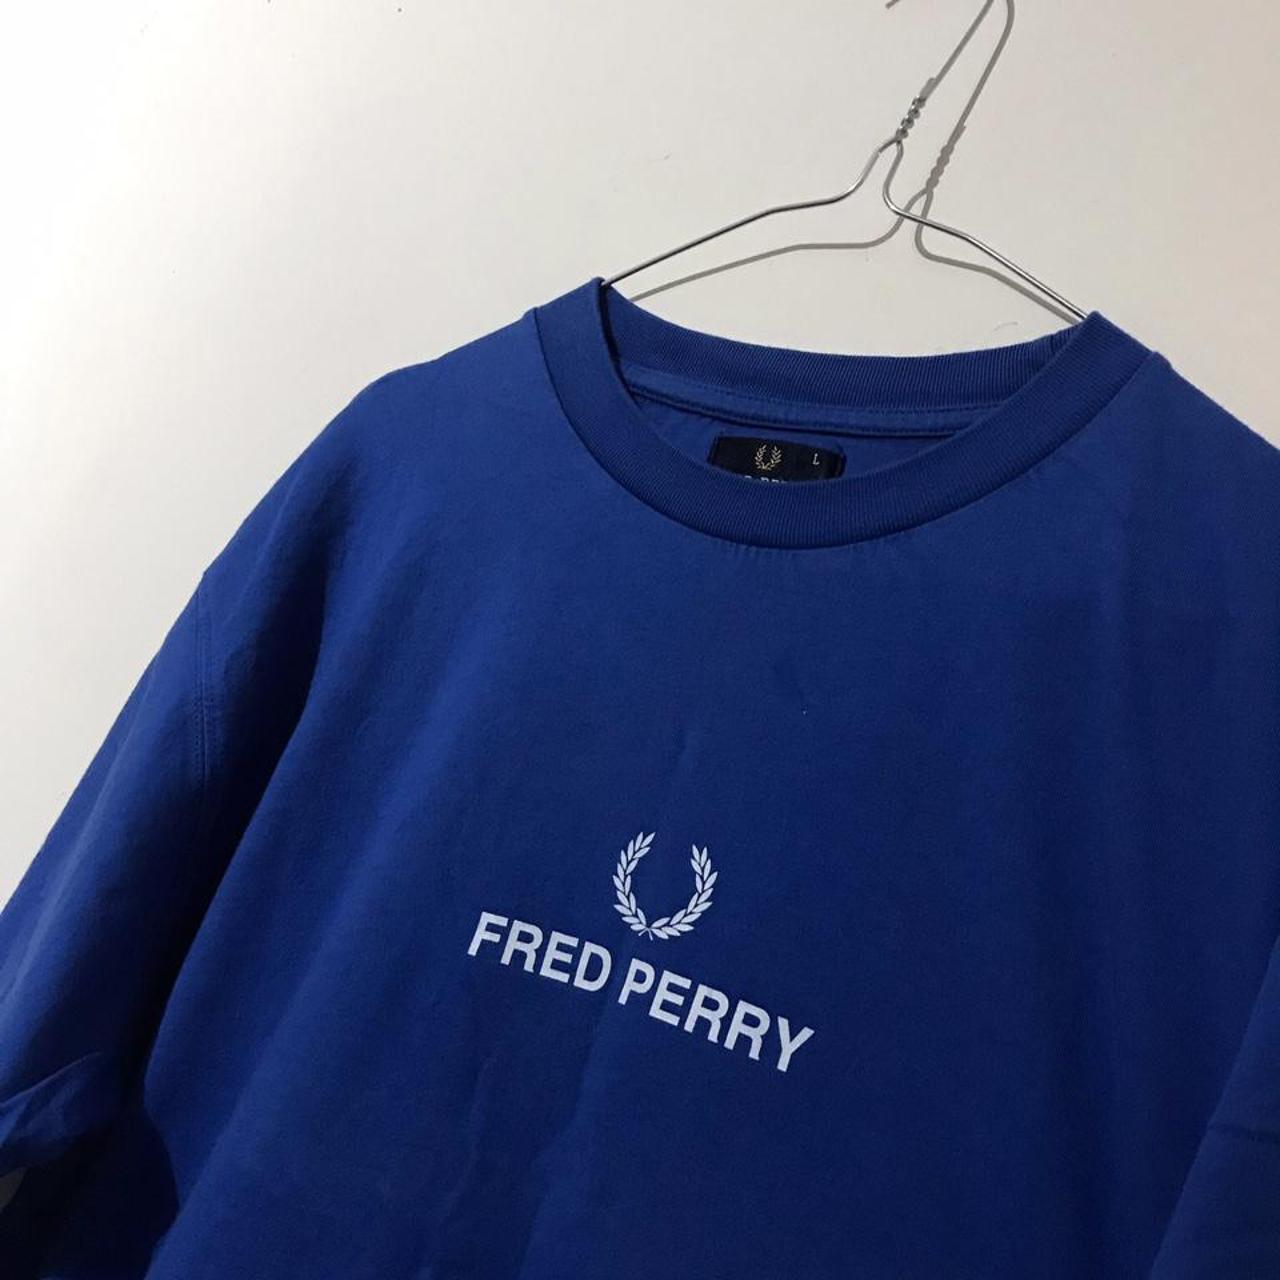 Product Image 2 - Men's vintage Fred Perry logo